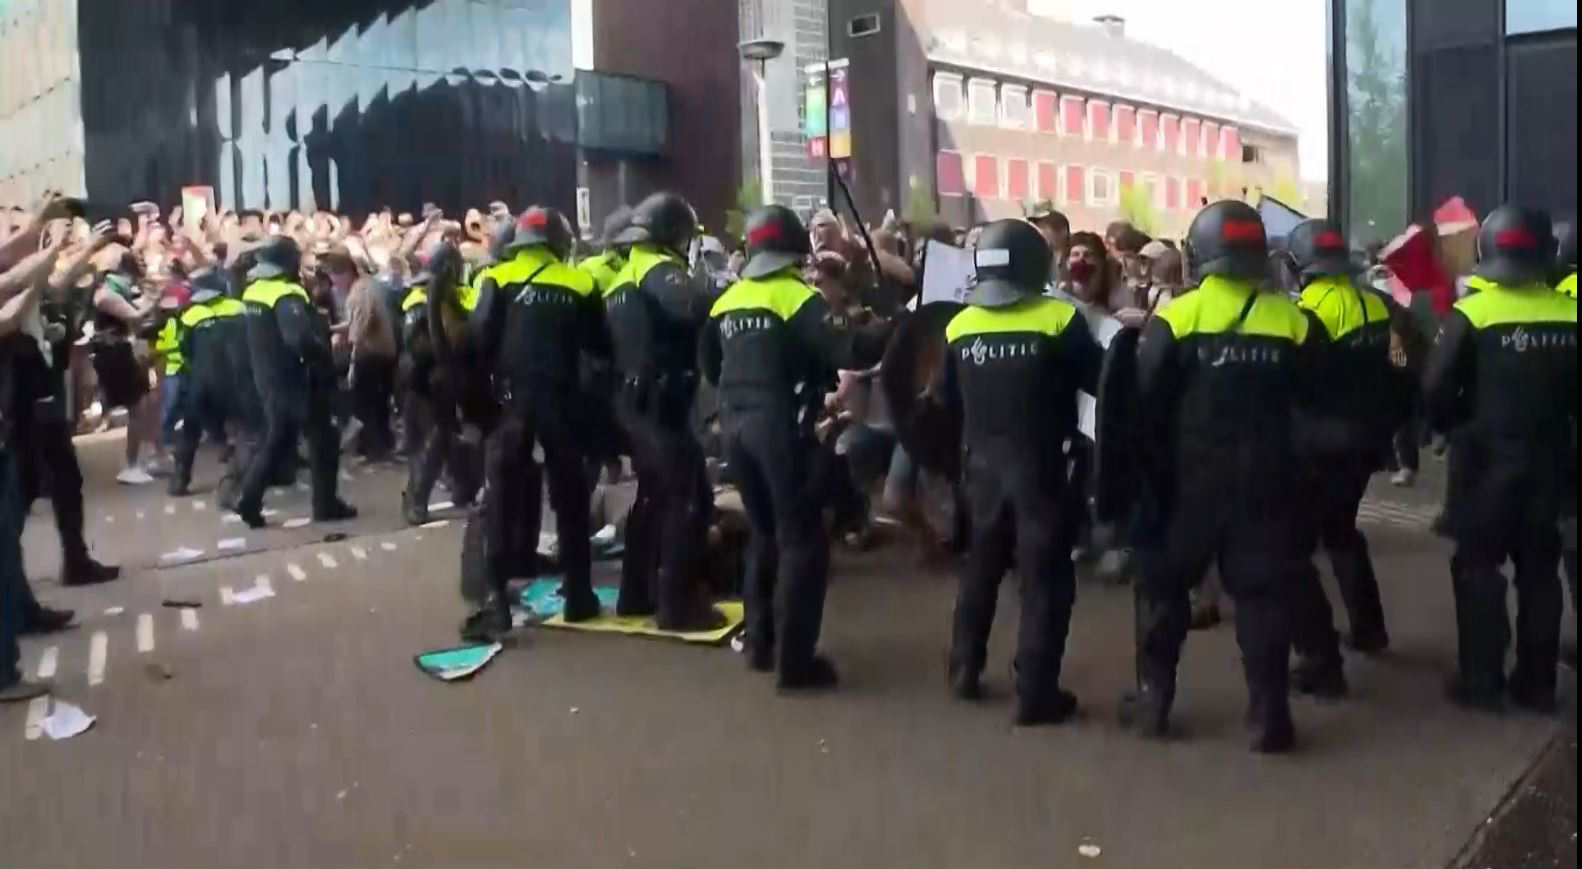 Police clash with pro-Palestine protesters at Amsterdam University 